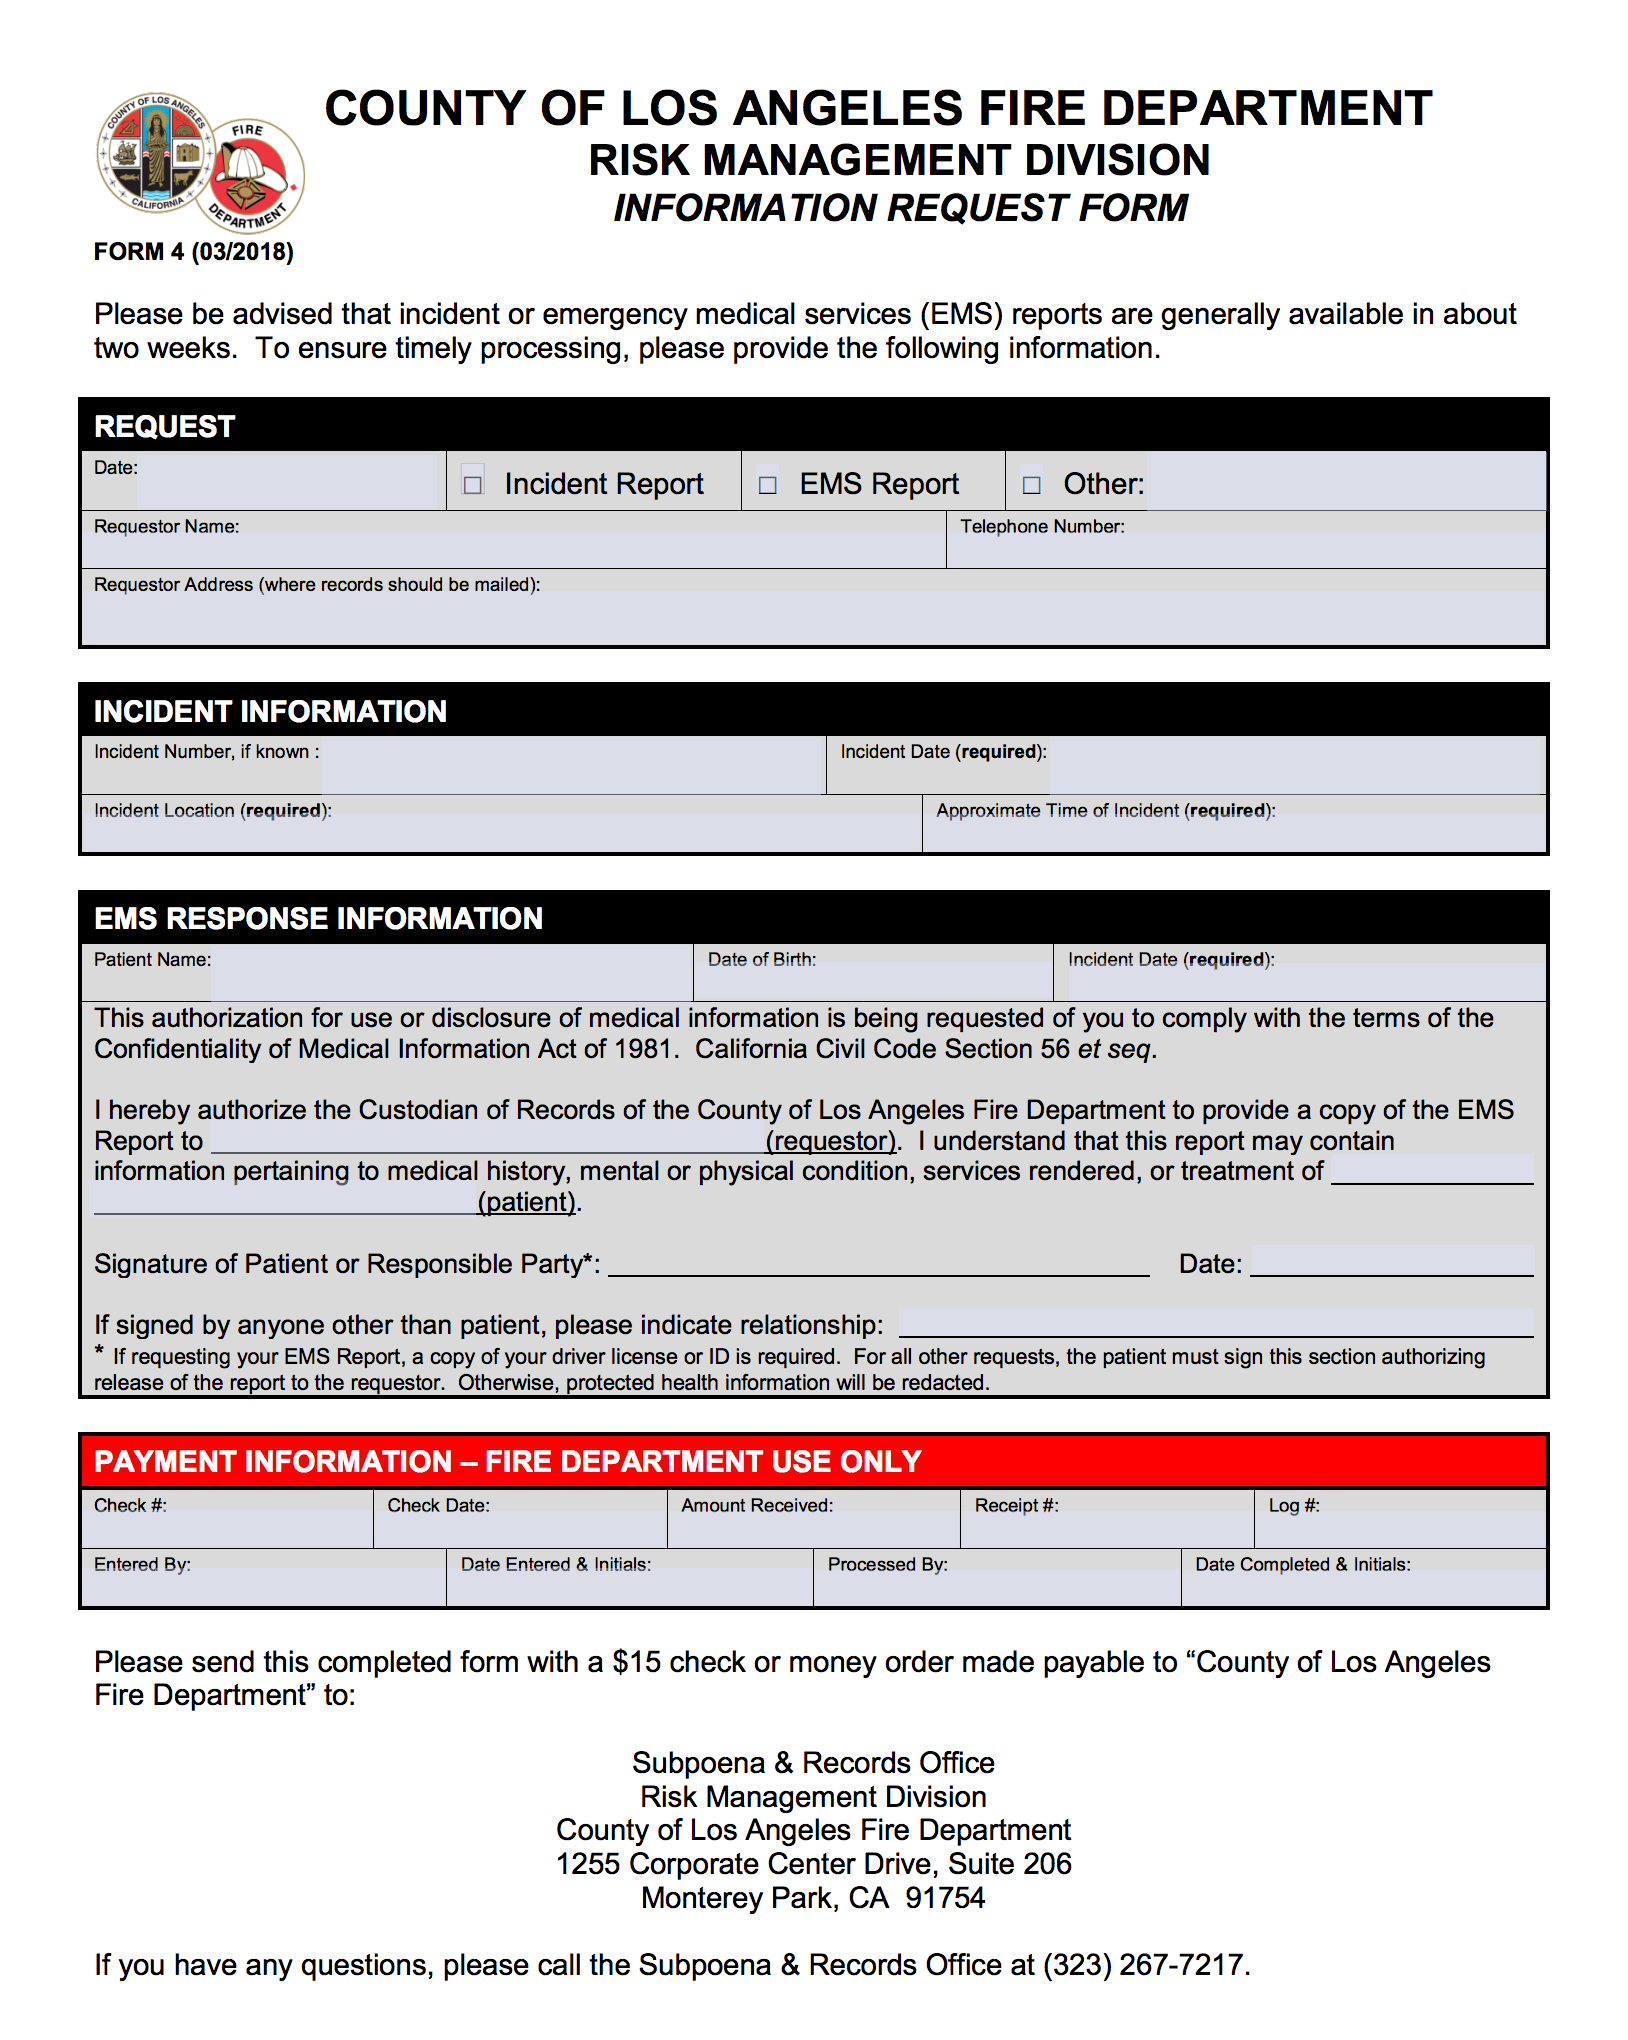 Picture of the ems form.